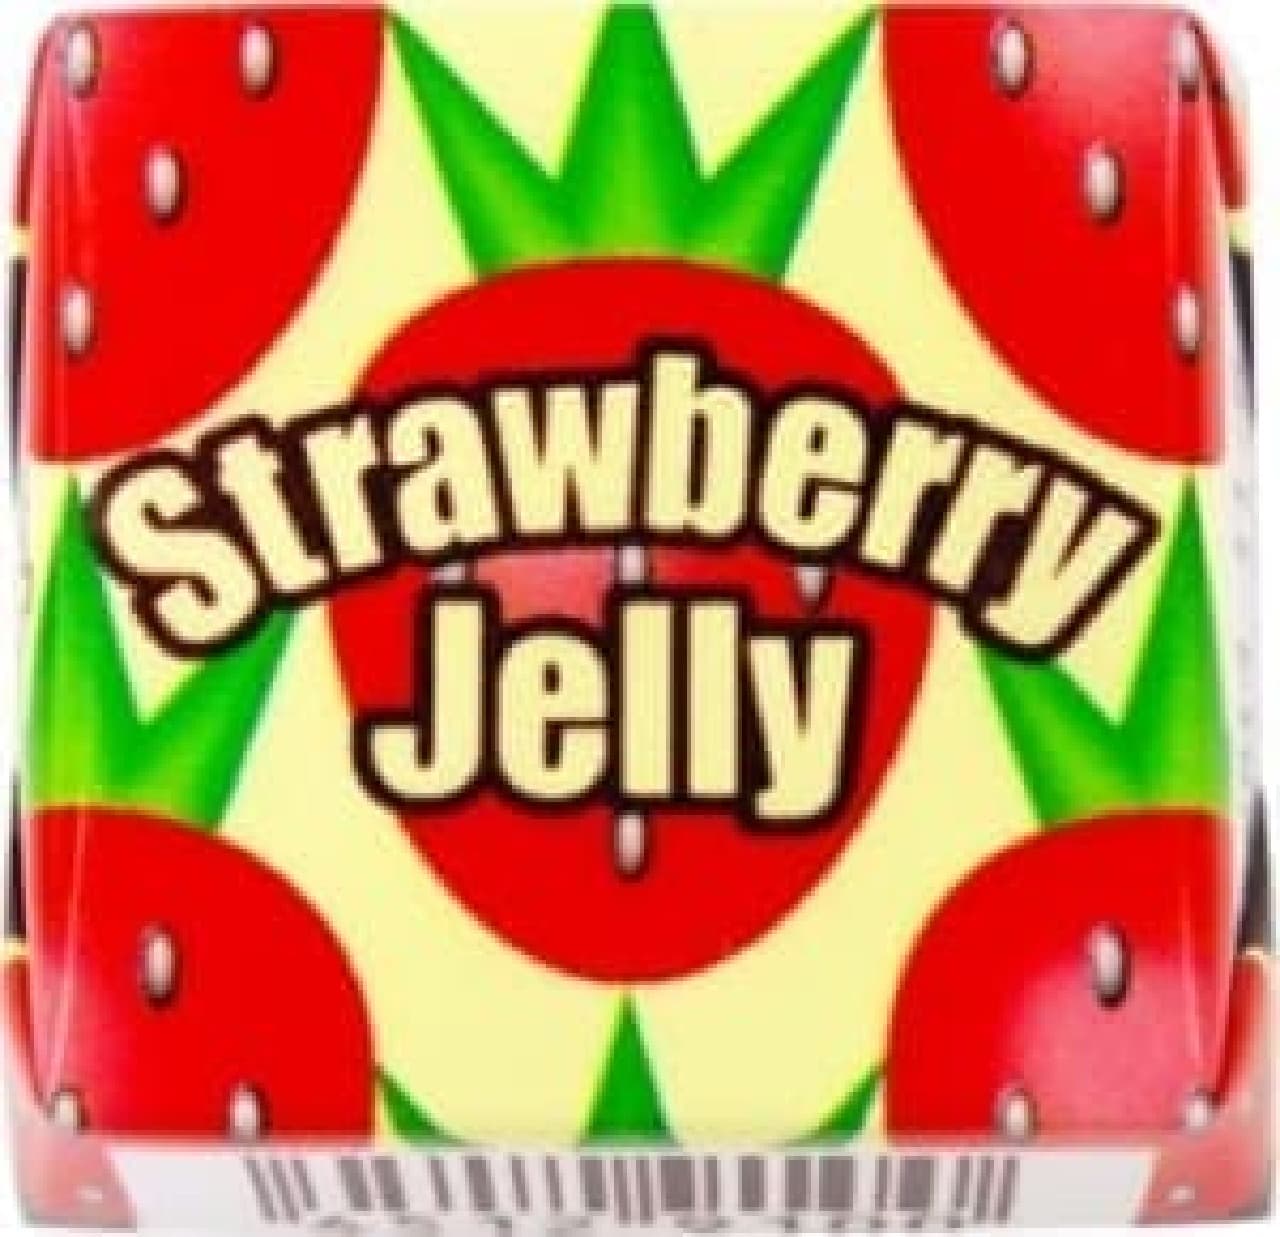 The popular "strawberry jelly" can be sold separately!